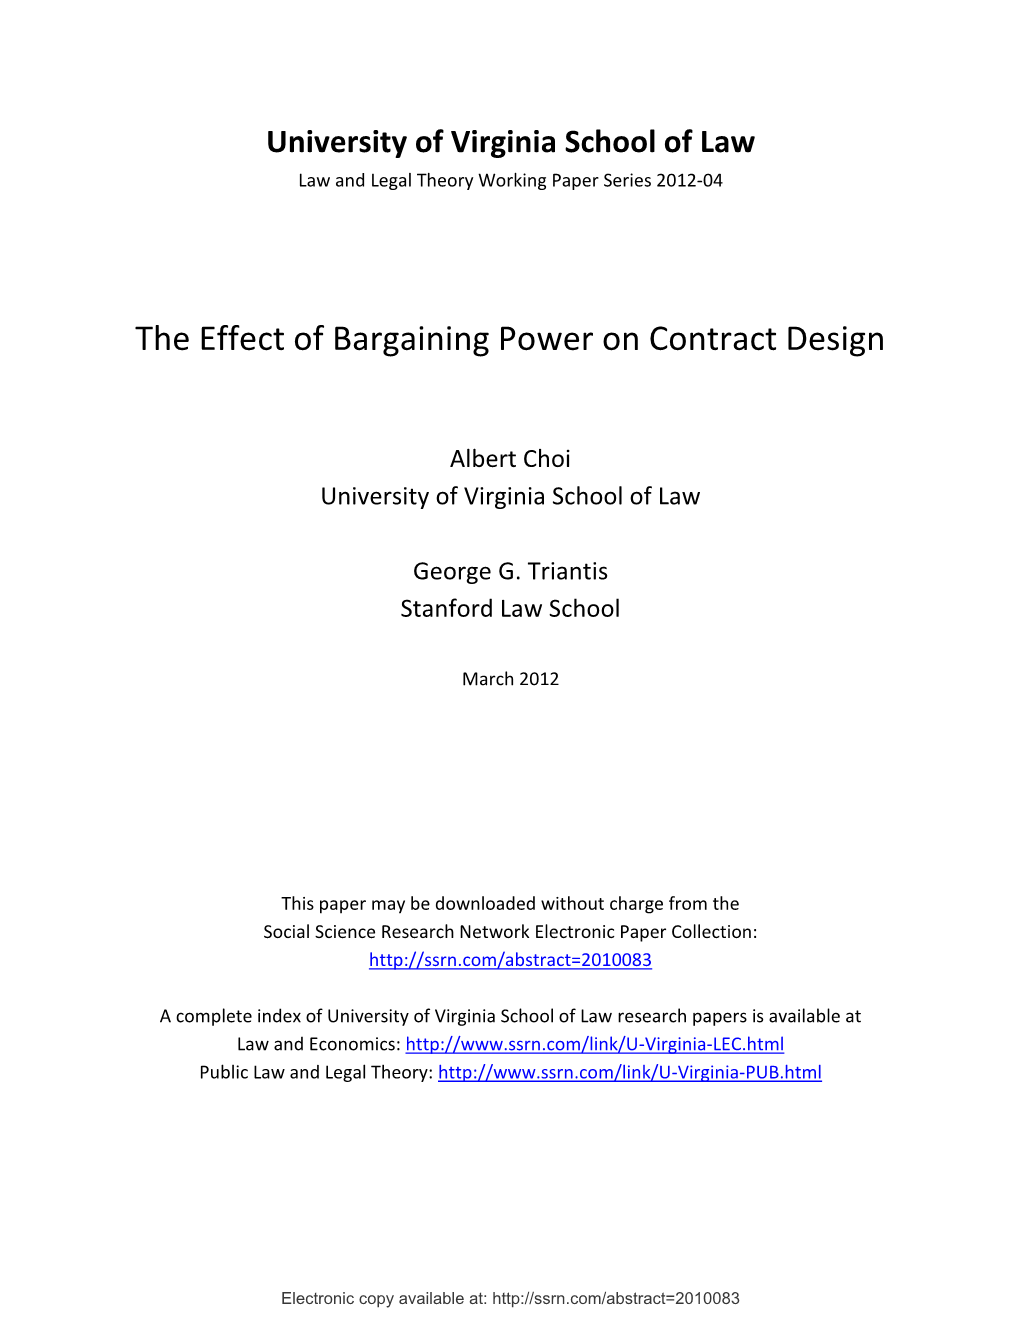 The Effect of Bargaining Power on Contract Design